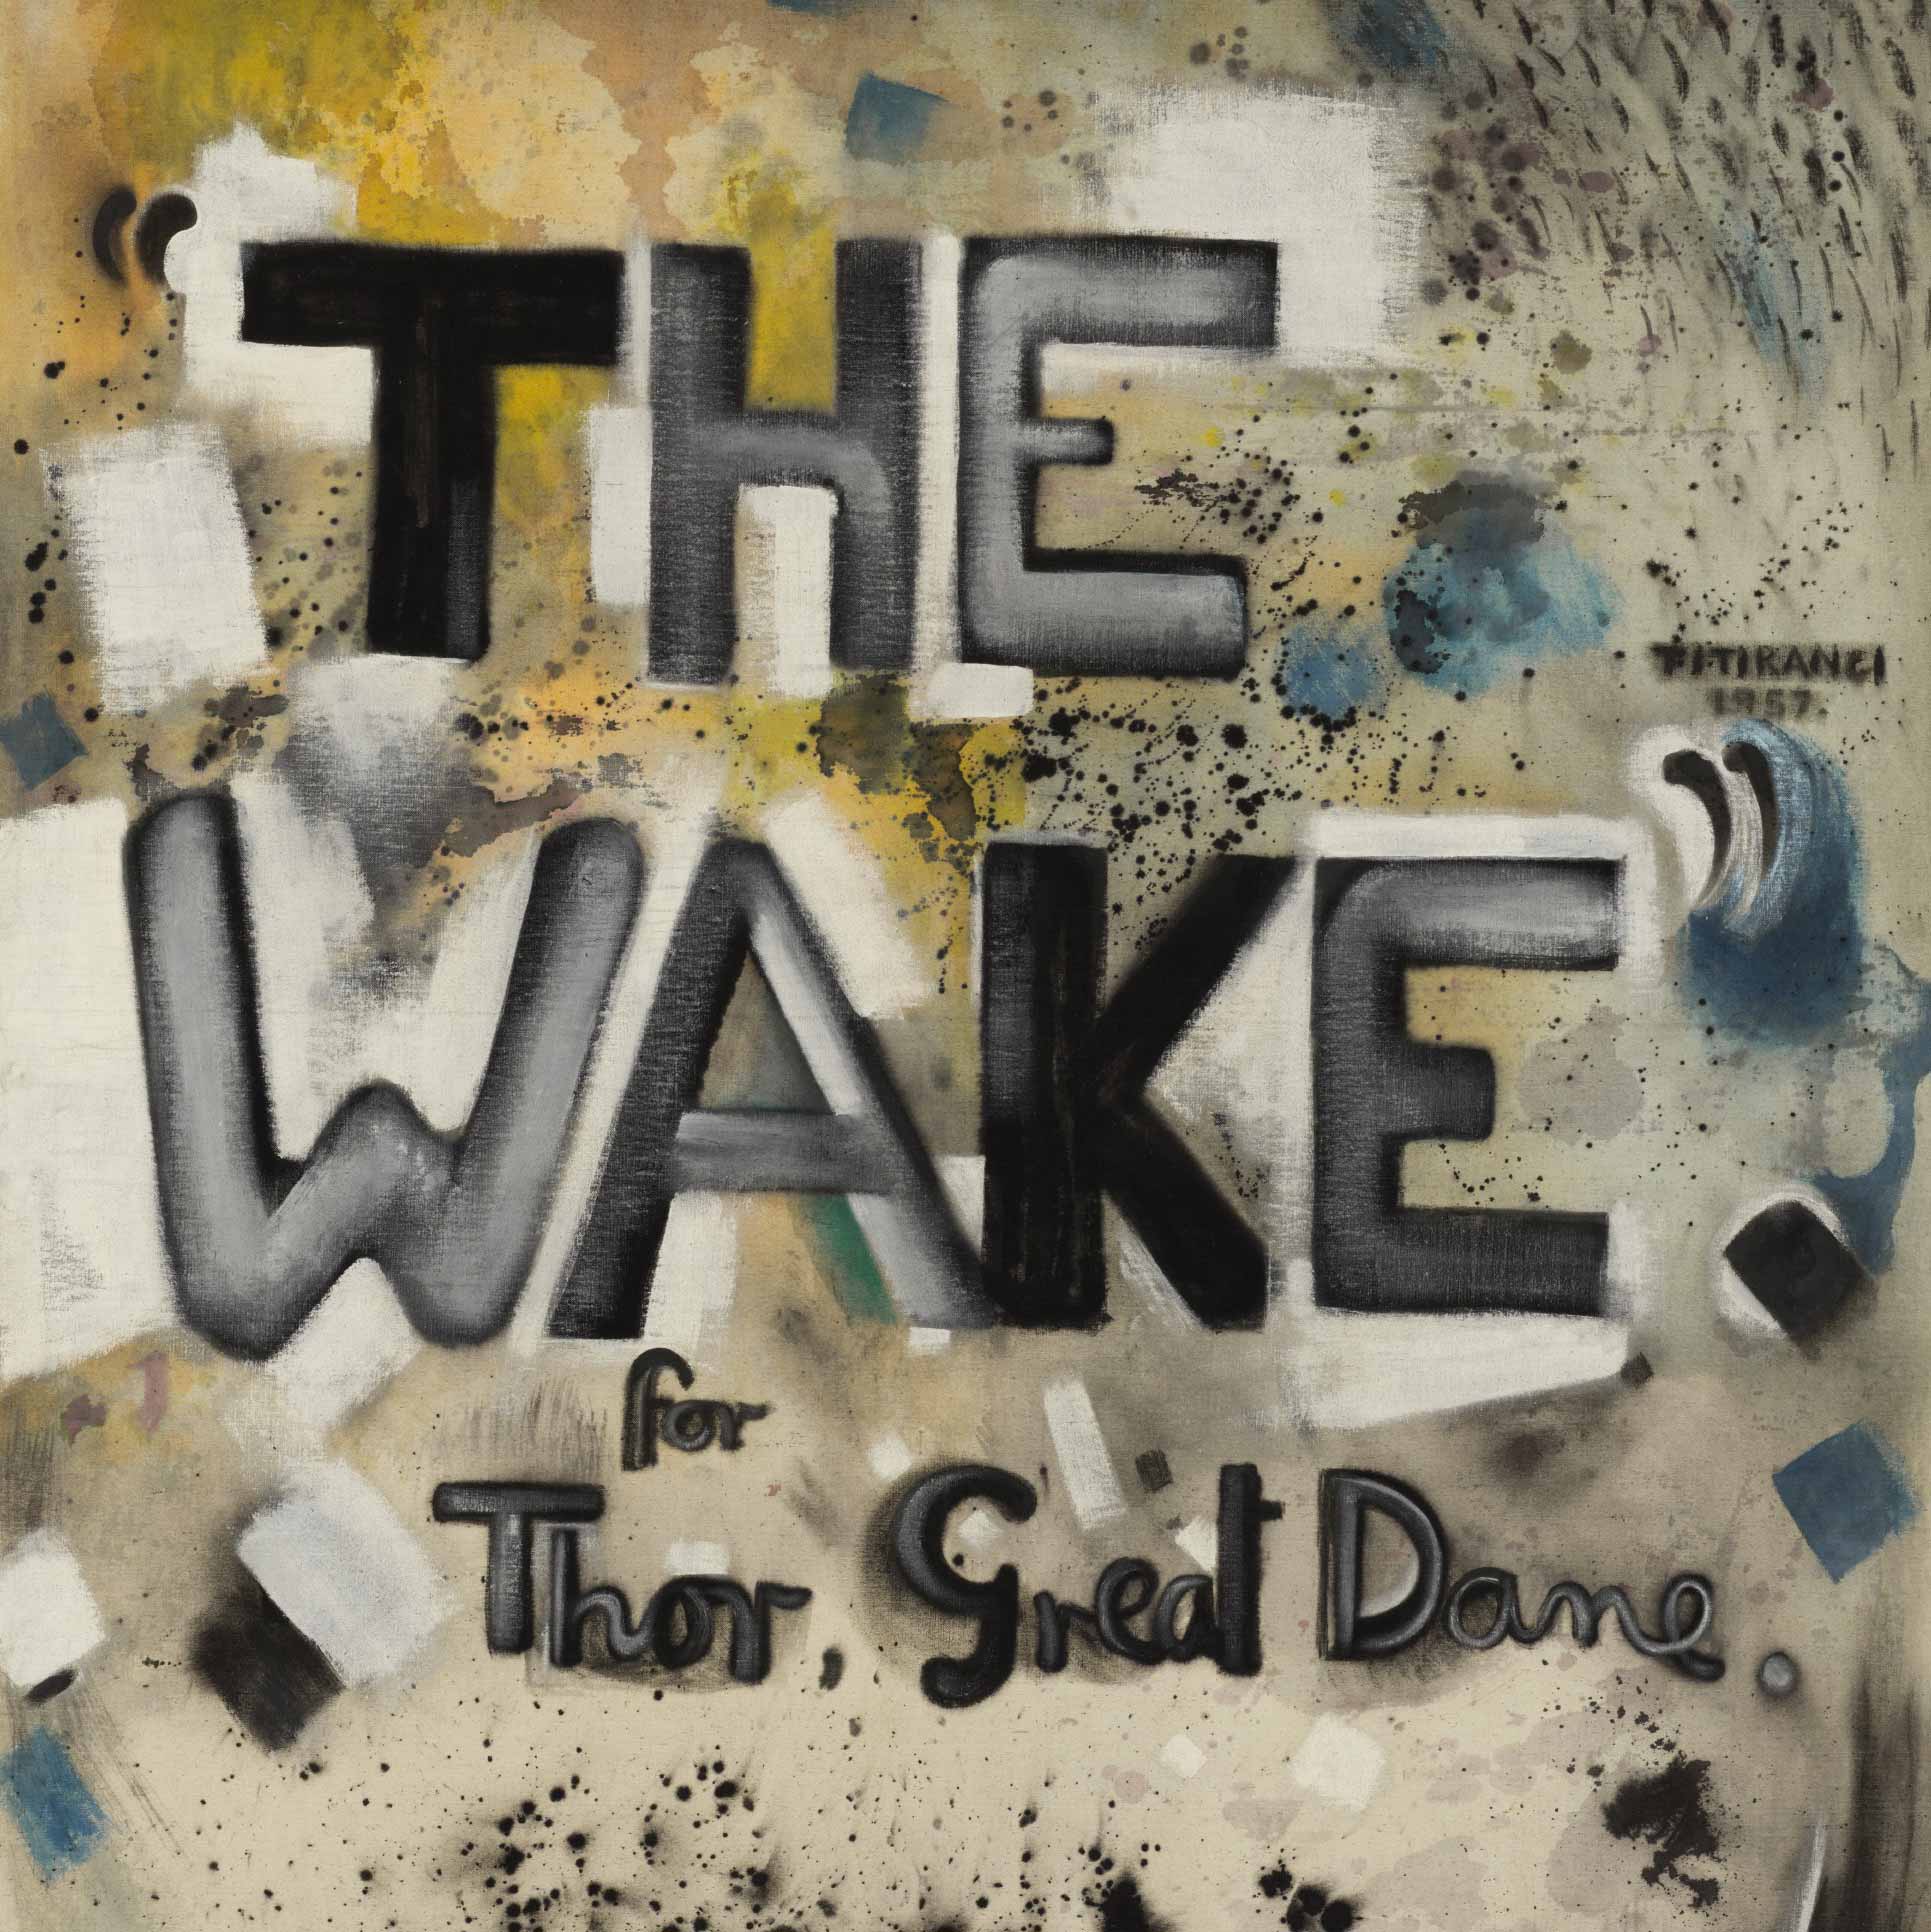 The Wake: A Poem in the Forest